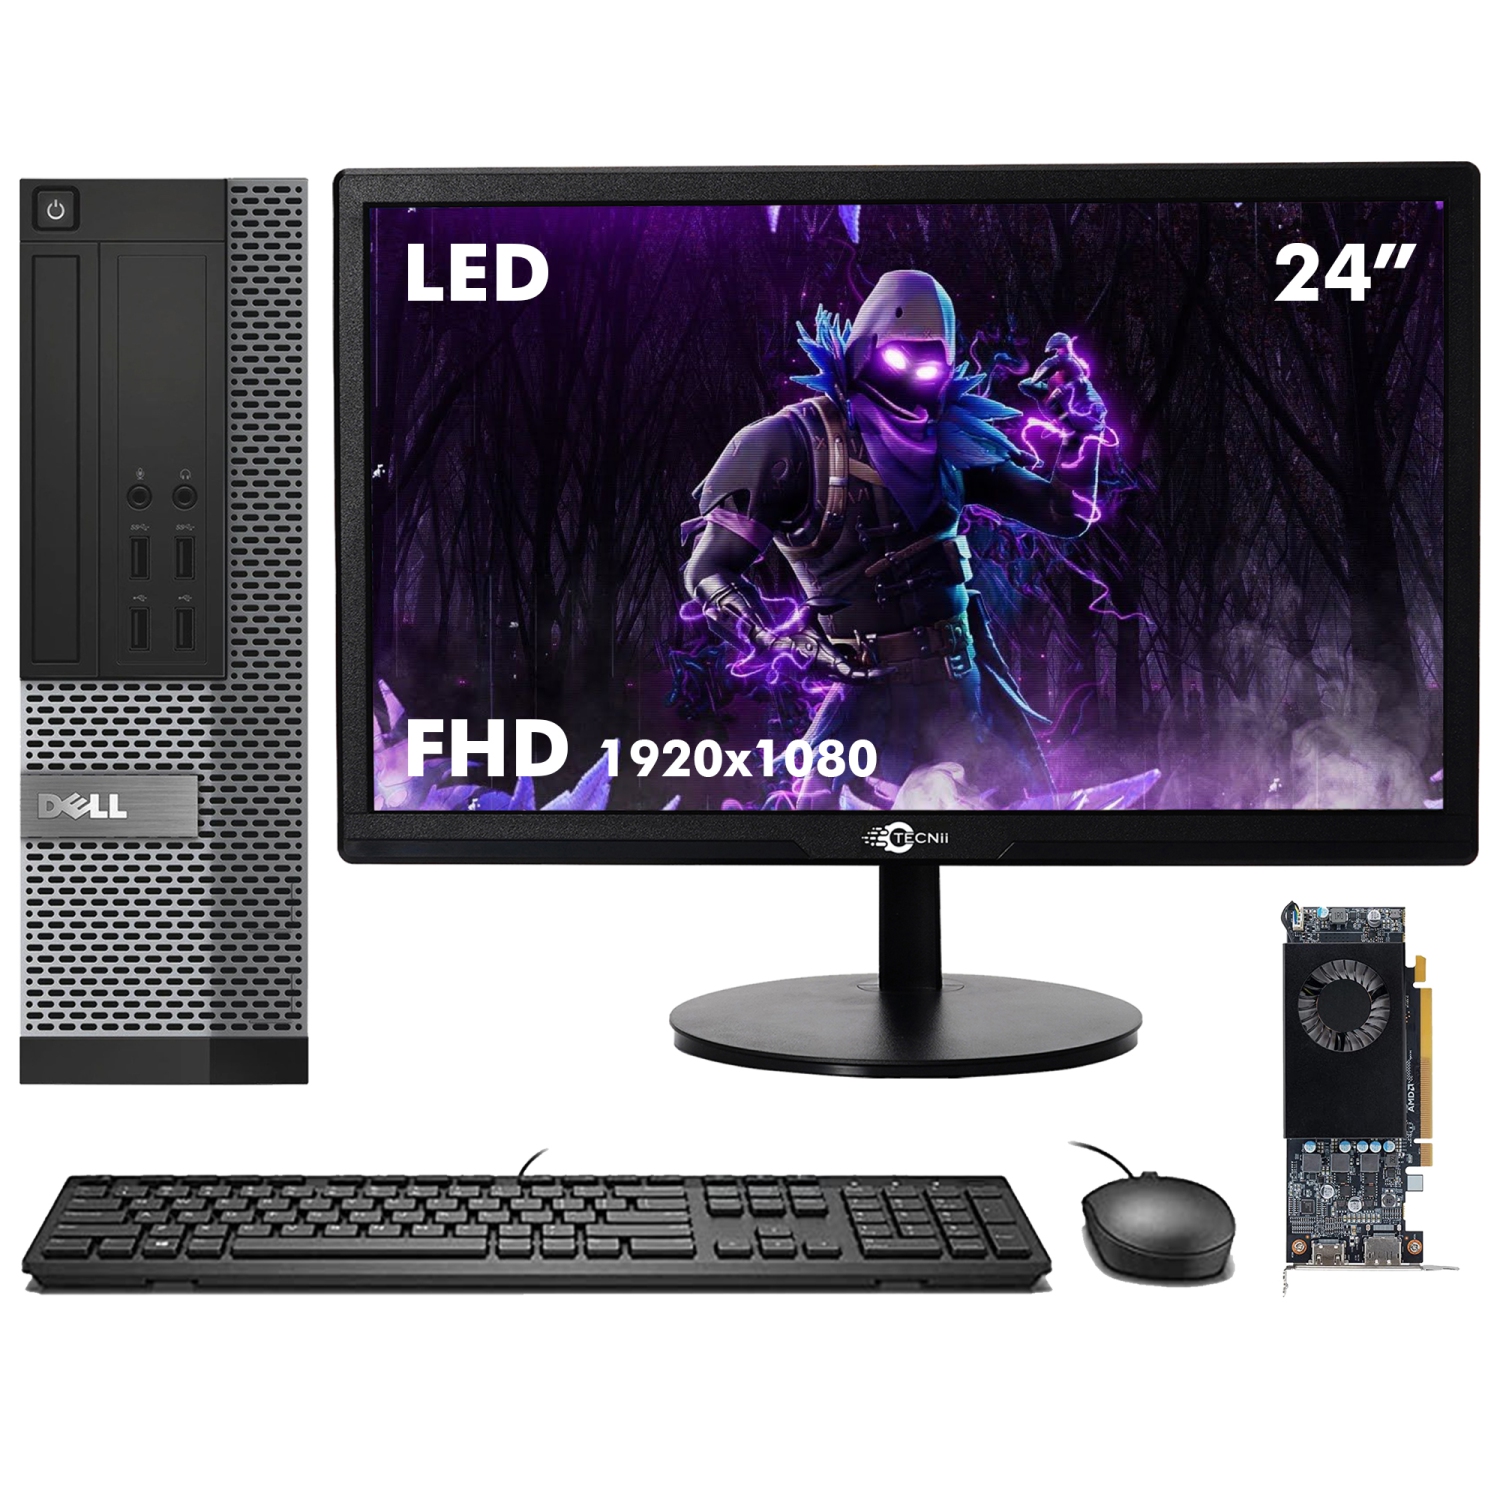 (Refurbished Good)-Gaming PC Dell with 24" Monitor|AMD Radeon RX 550 4GB Graphics Card|Intel Core i7 Processor| 1TB SSD Storage 16GB Memory|Windows 10 Pro|New Keyboard & Mouse|Wifi